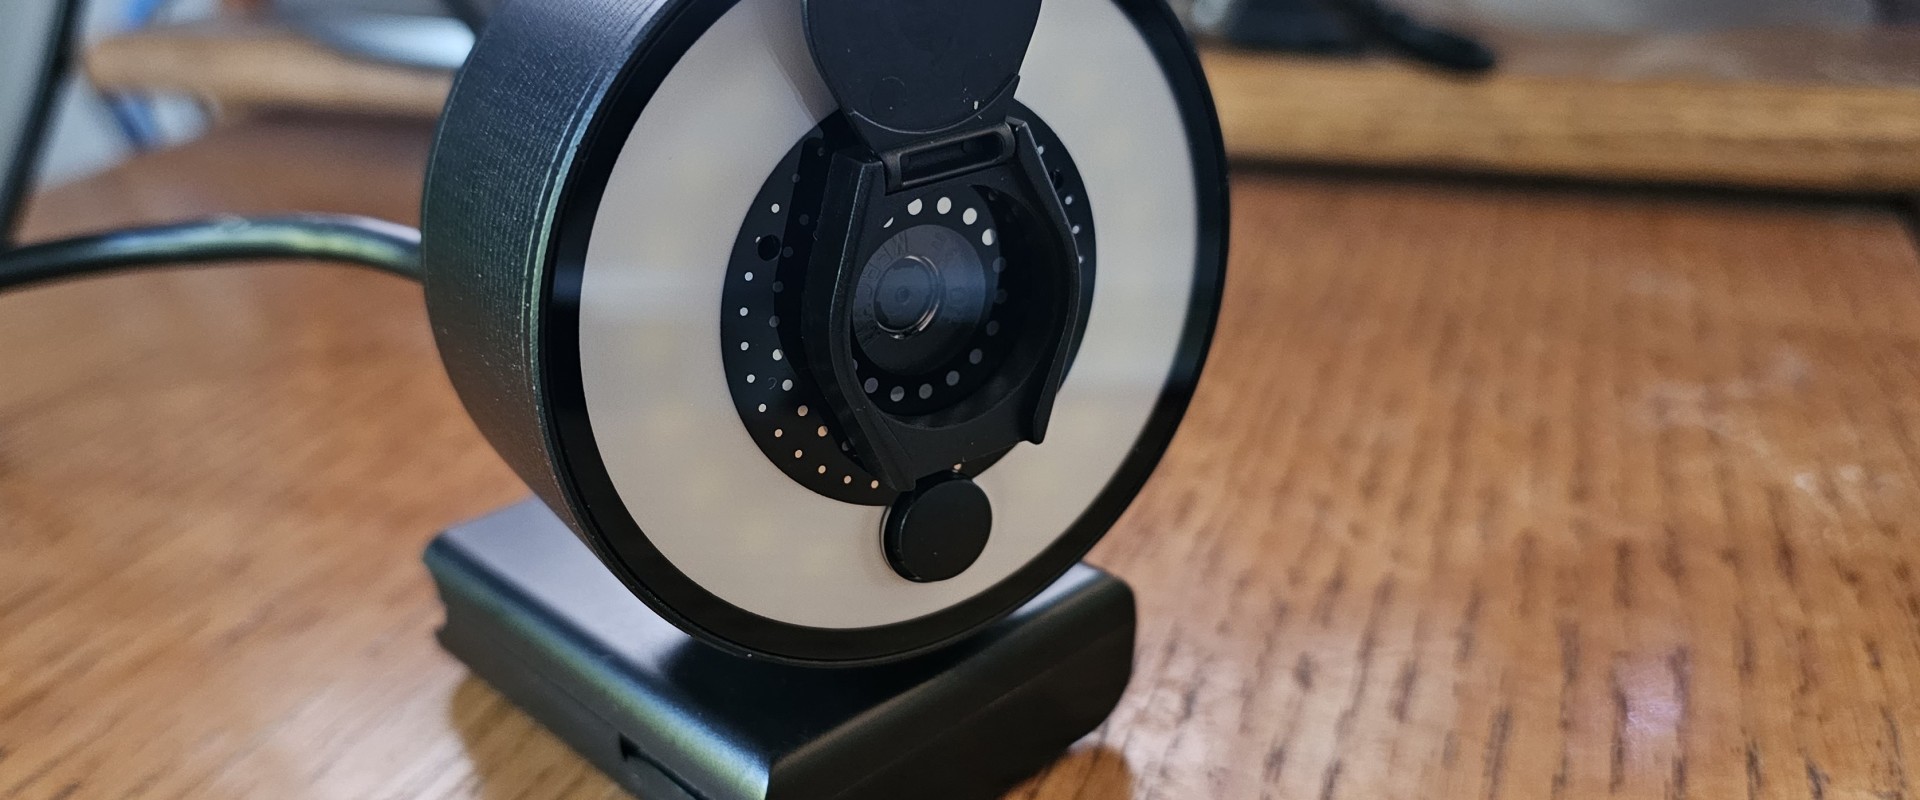 Everything You Need to Know About USB Webcams